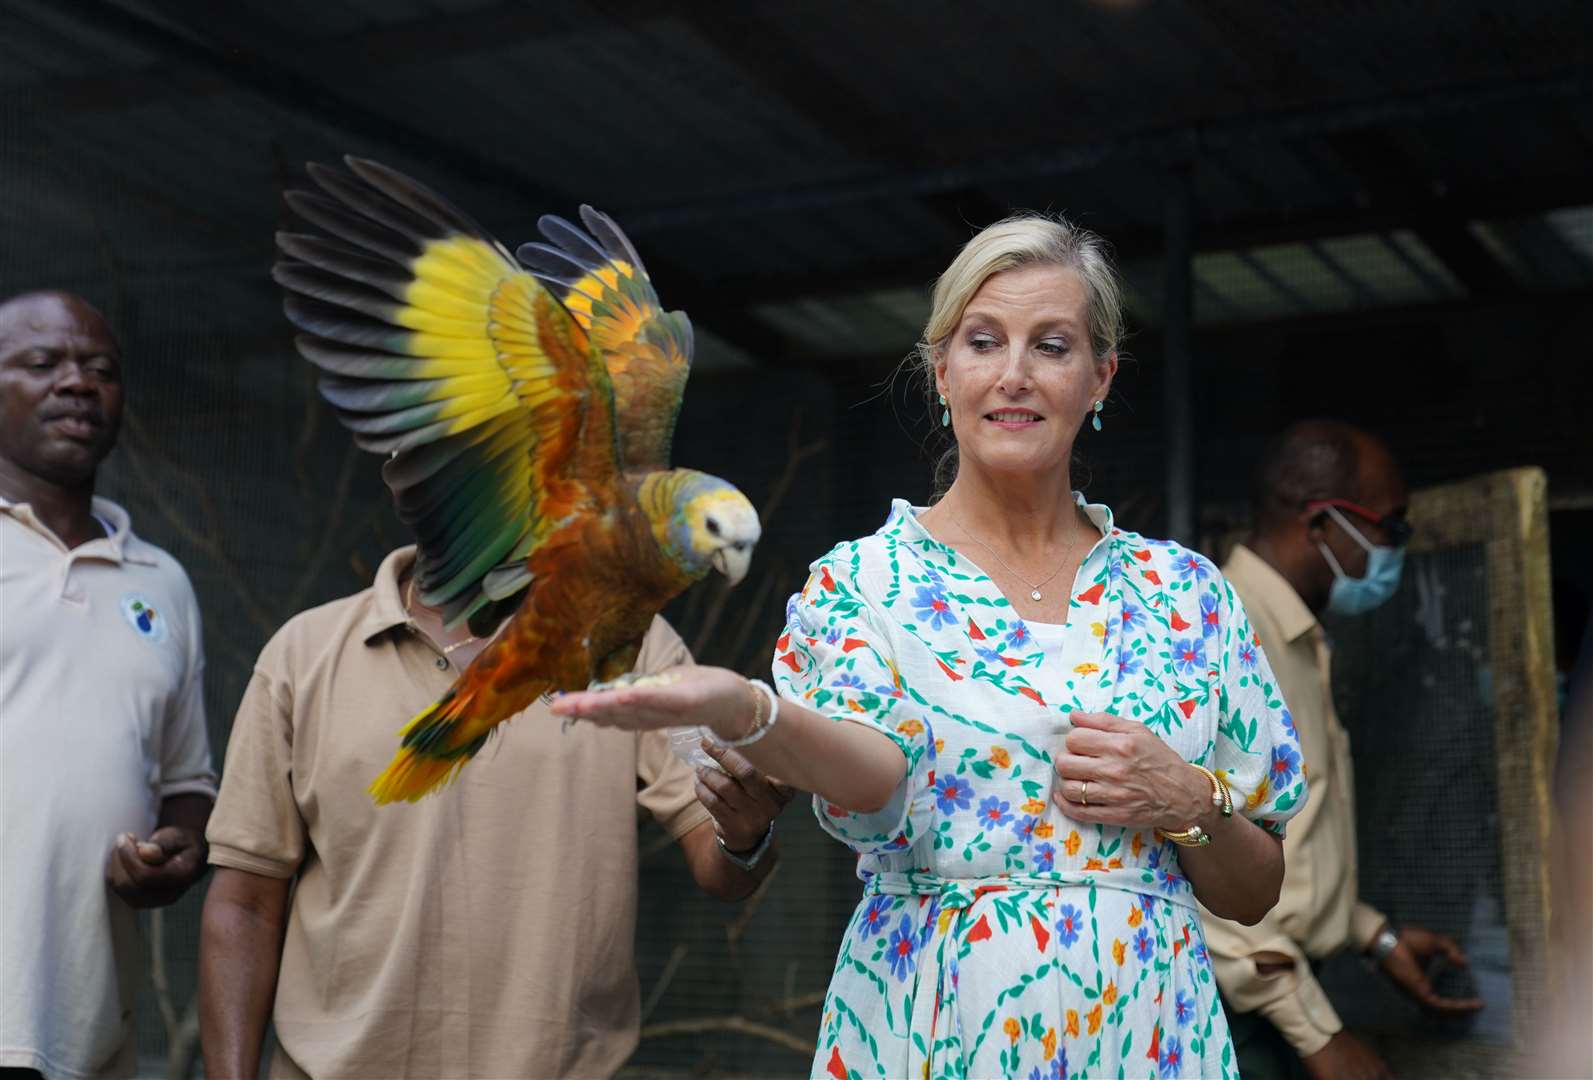 Sophie with St Vincent’s national bird, the Amazona guildingii at the Botanical Gardens in St Vincent and the Grenadines (Joe Giddens/PA)